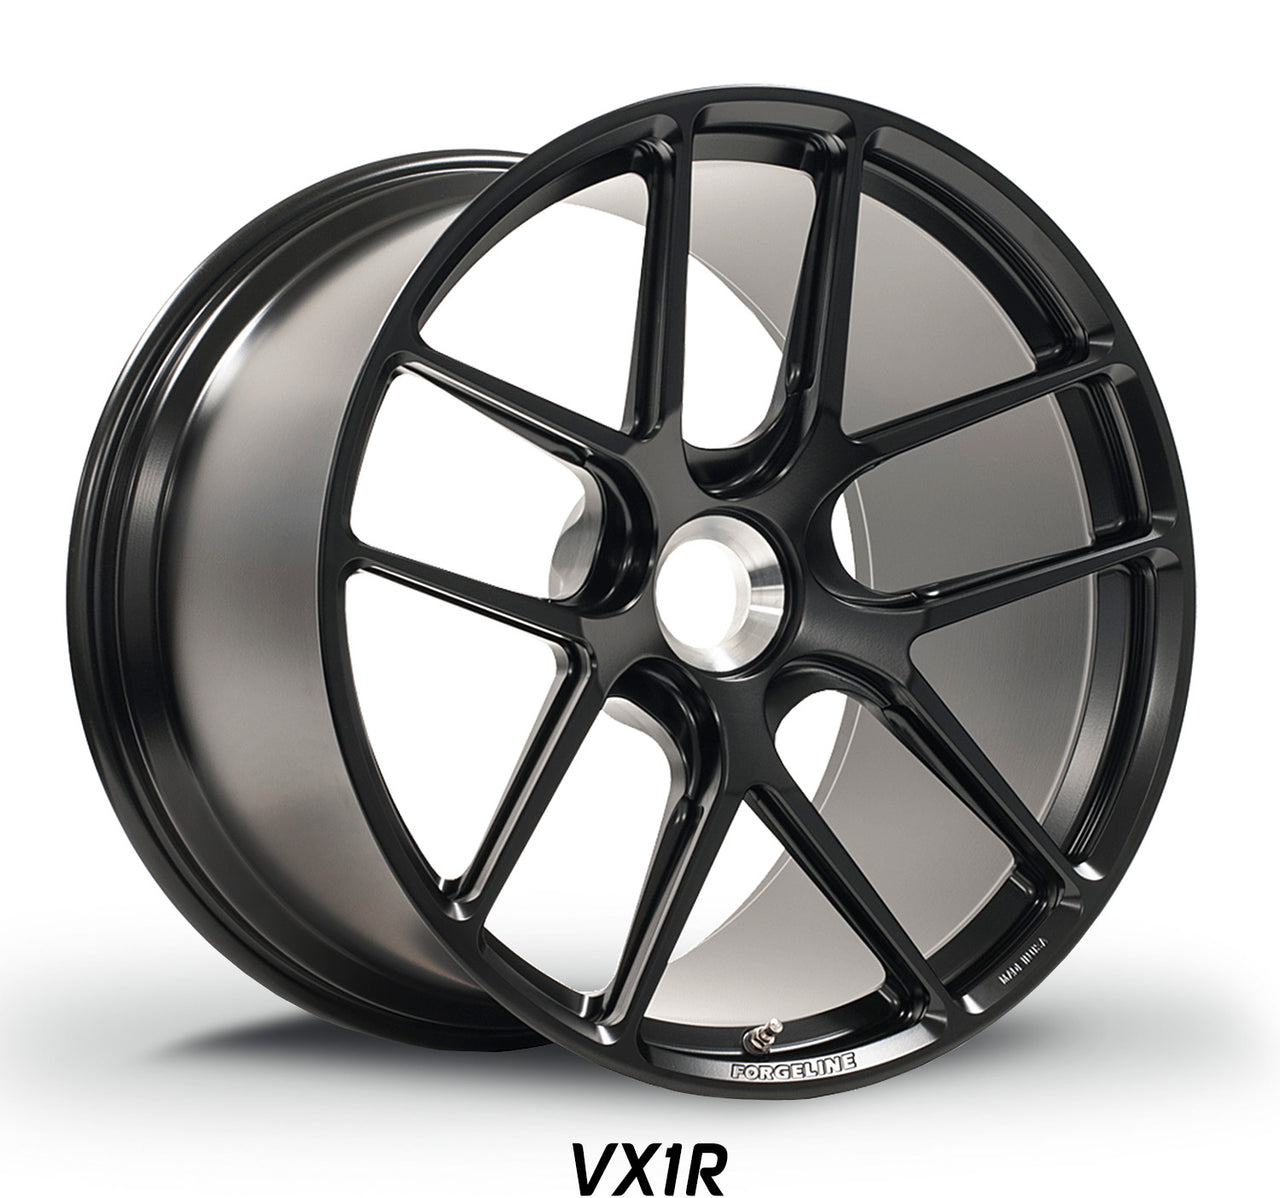 Satin Black Forgeline VX1R for 991 Porsche 911 GT3RS strongest forged wheels for HPDE and Time Trials